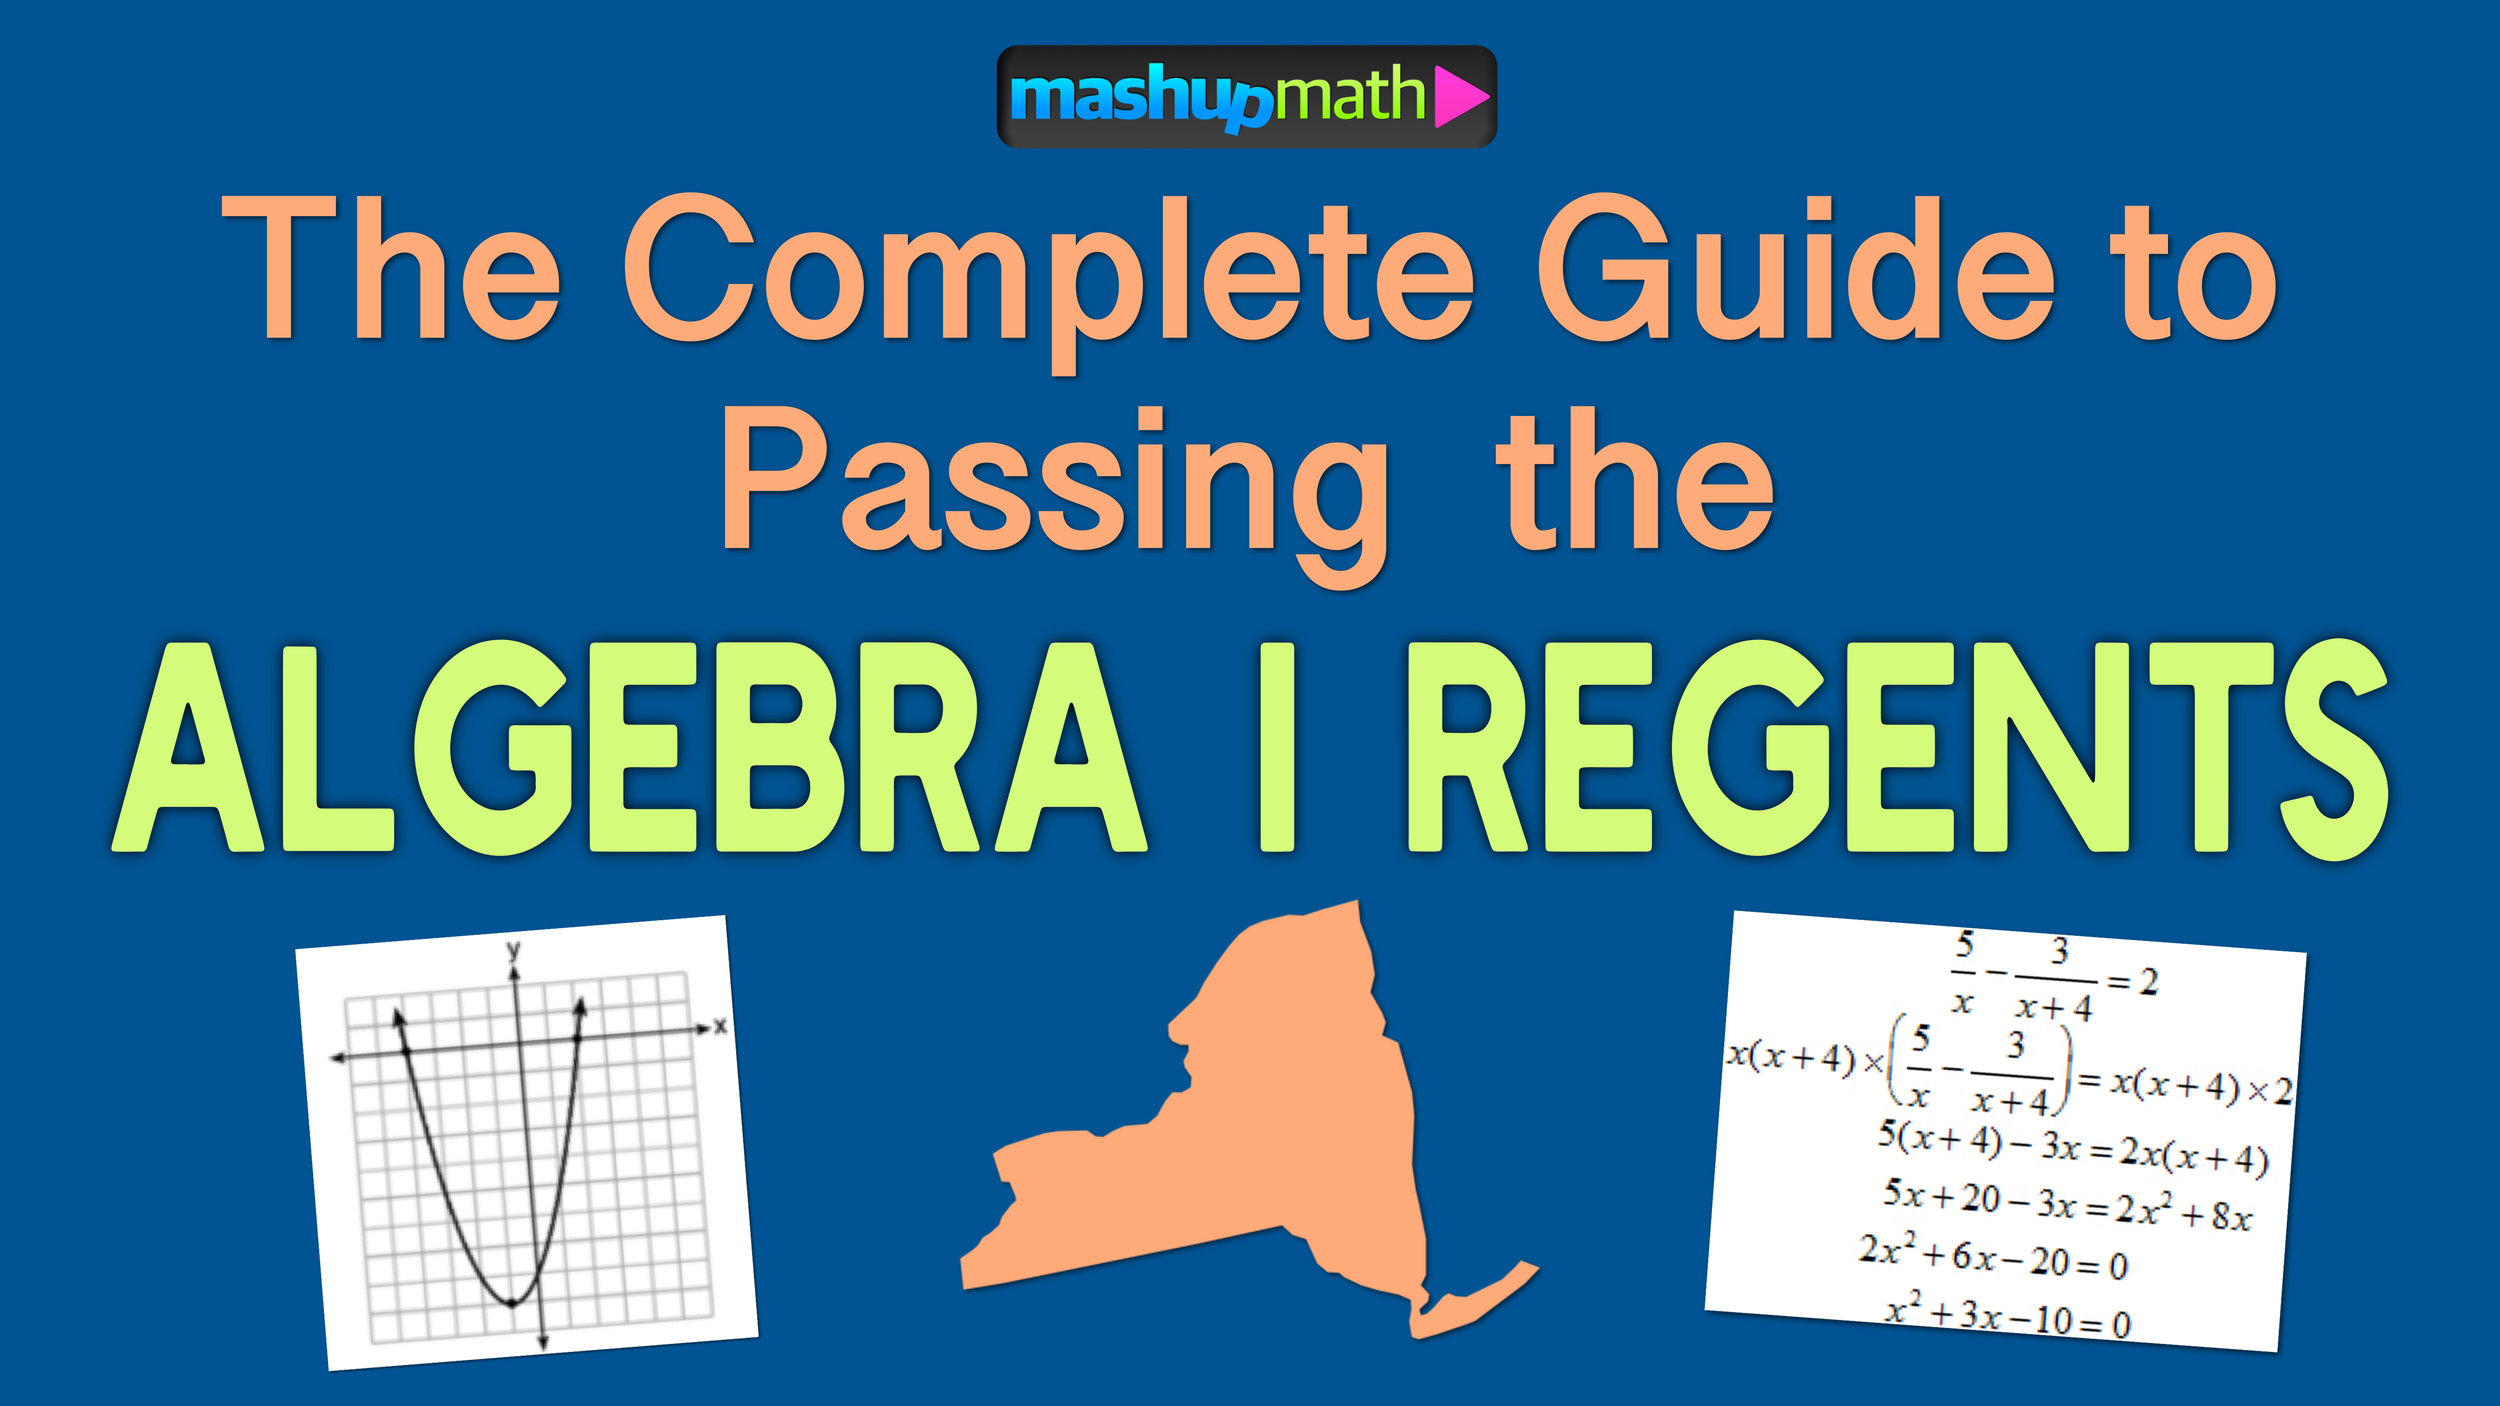 the-ultimate-guide-to-passing-the-algebra-1-regents-exam-mashup-math